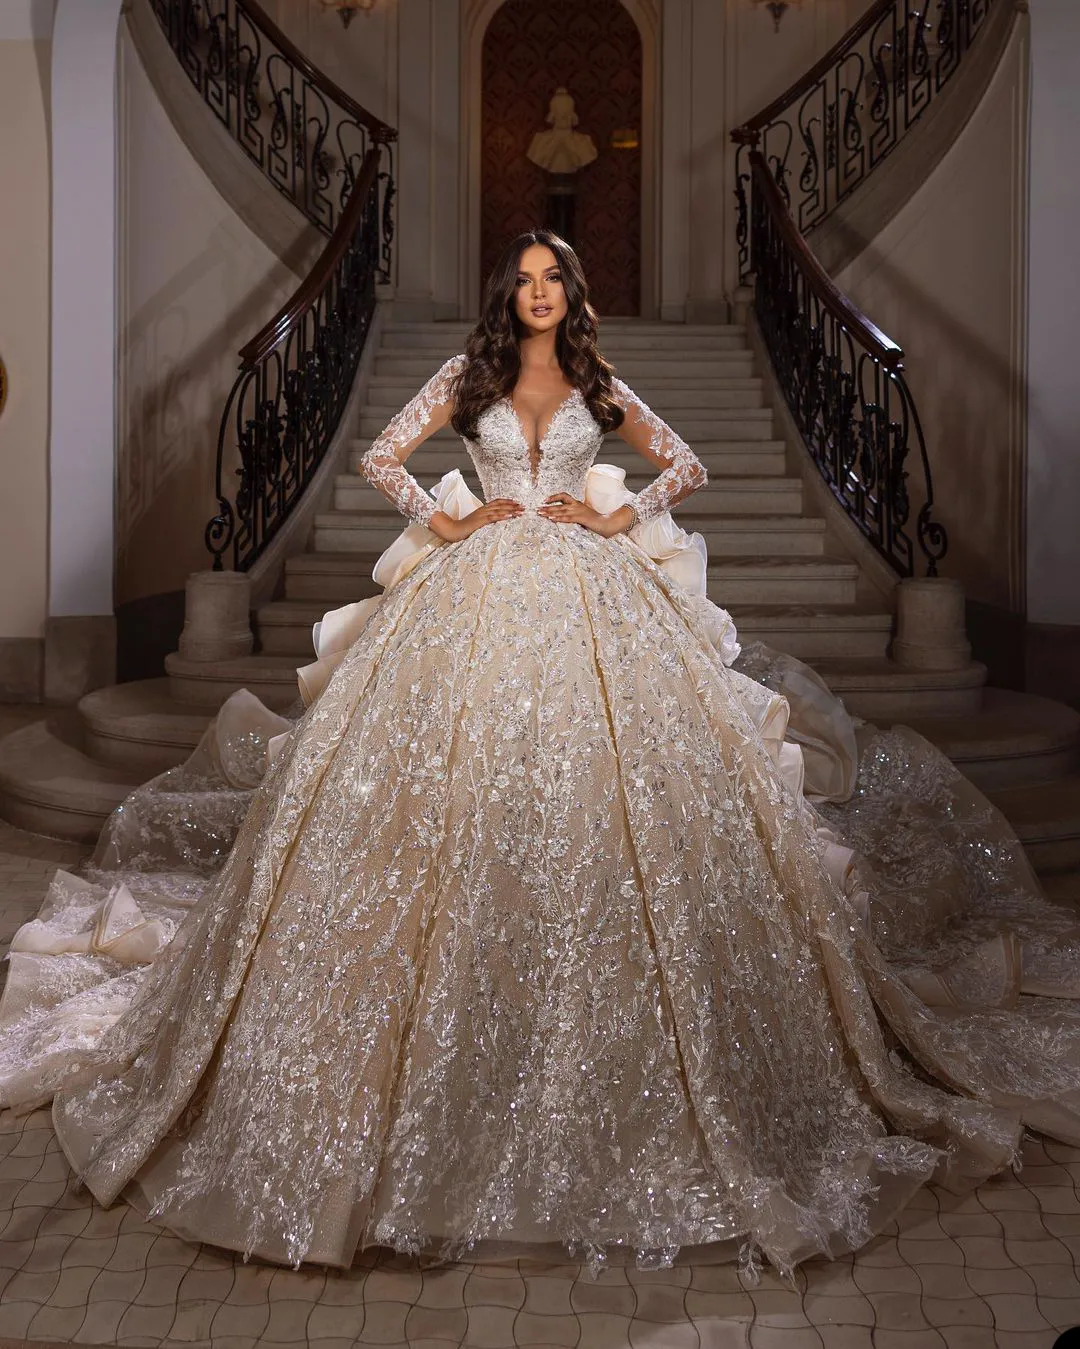 Exquisite V Neck Wedding Ball Gown Full Length Ruffles Marriage Dress Shiny Sequins Lace Beads Aso Ebi Bridal Gowns Arabic Dubai